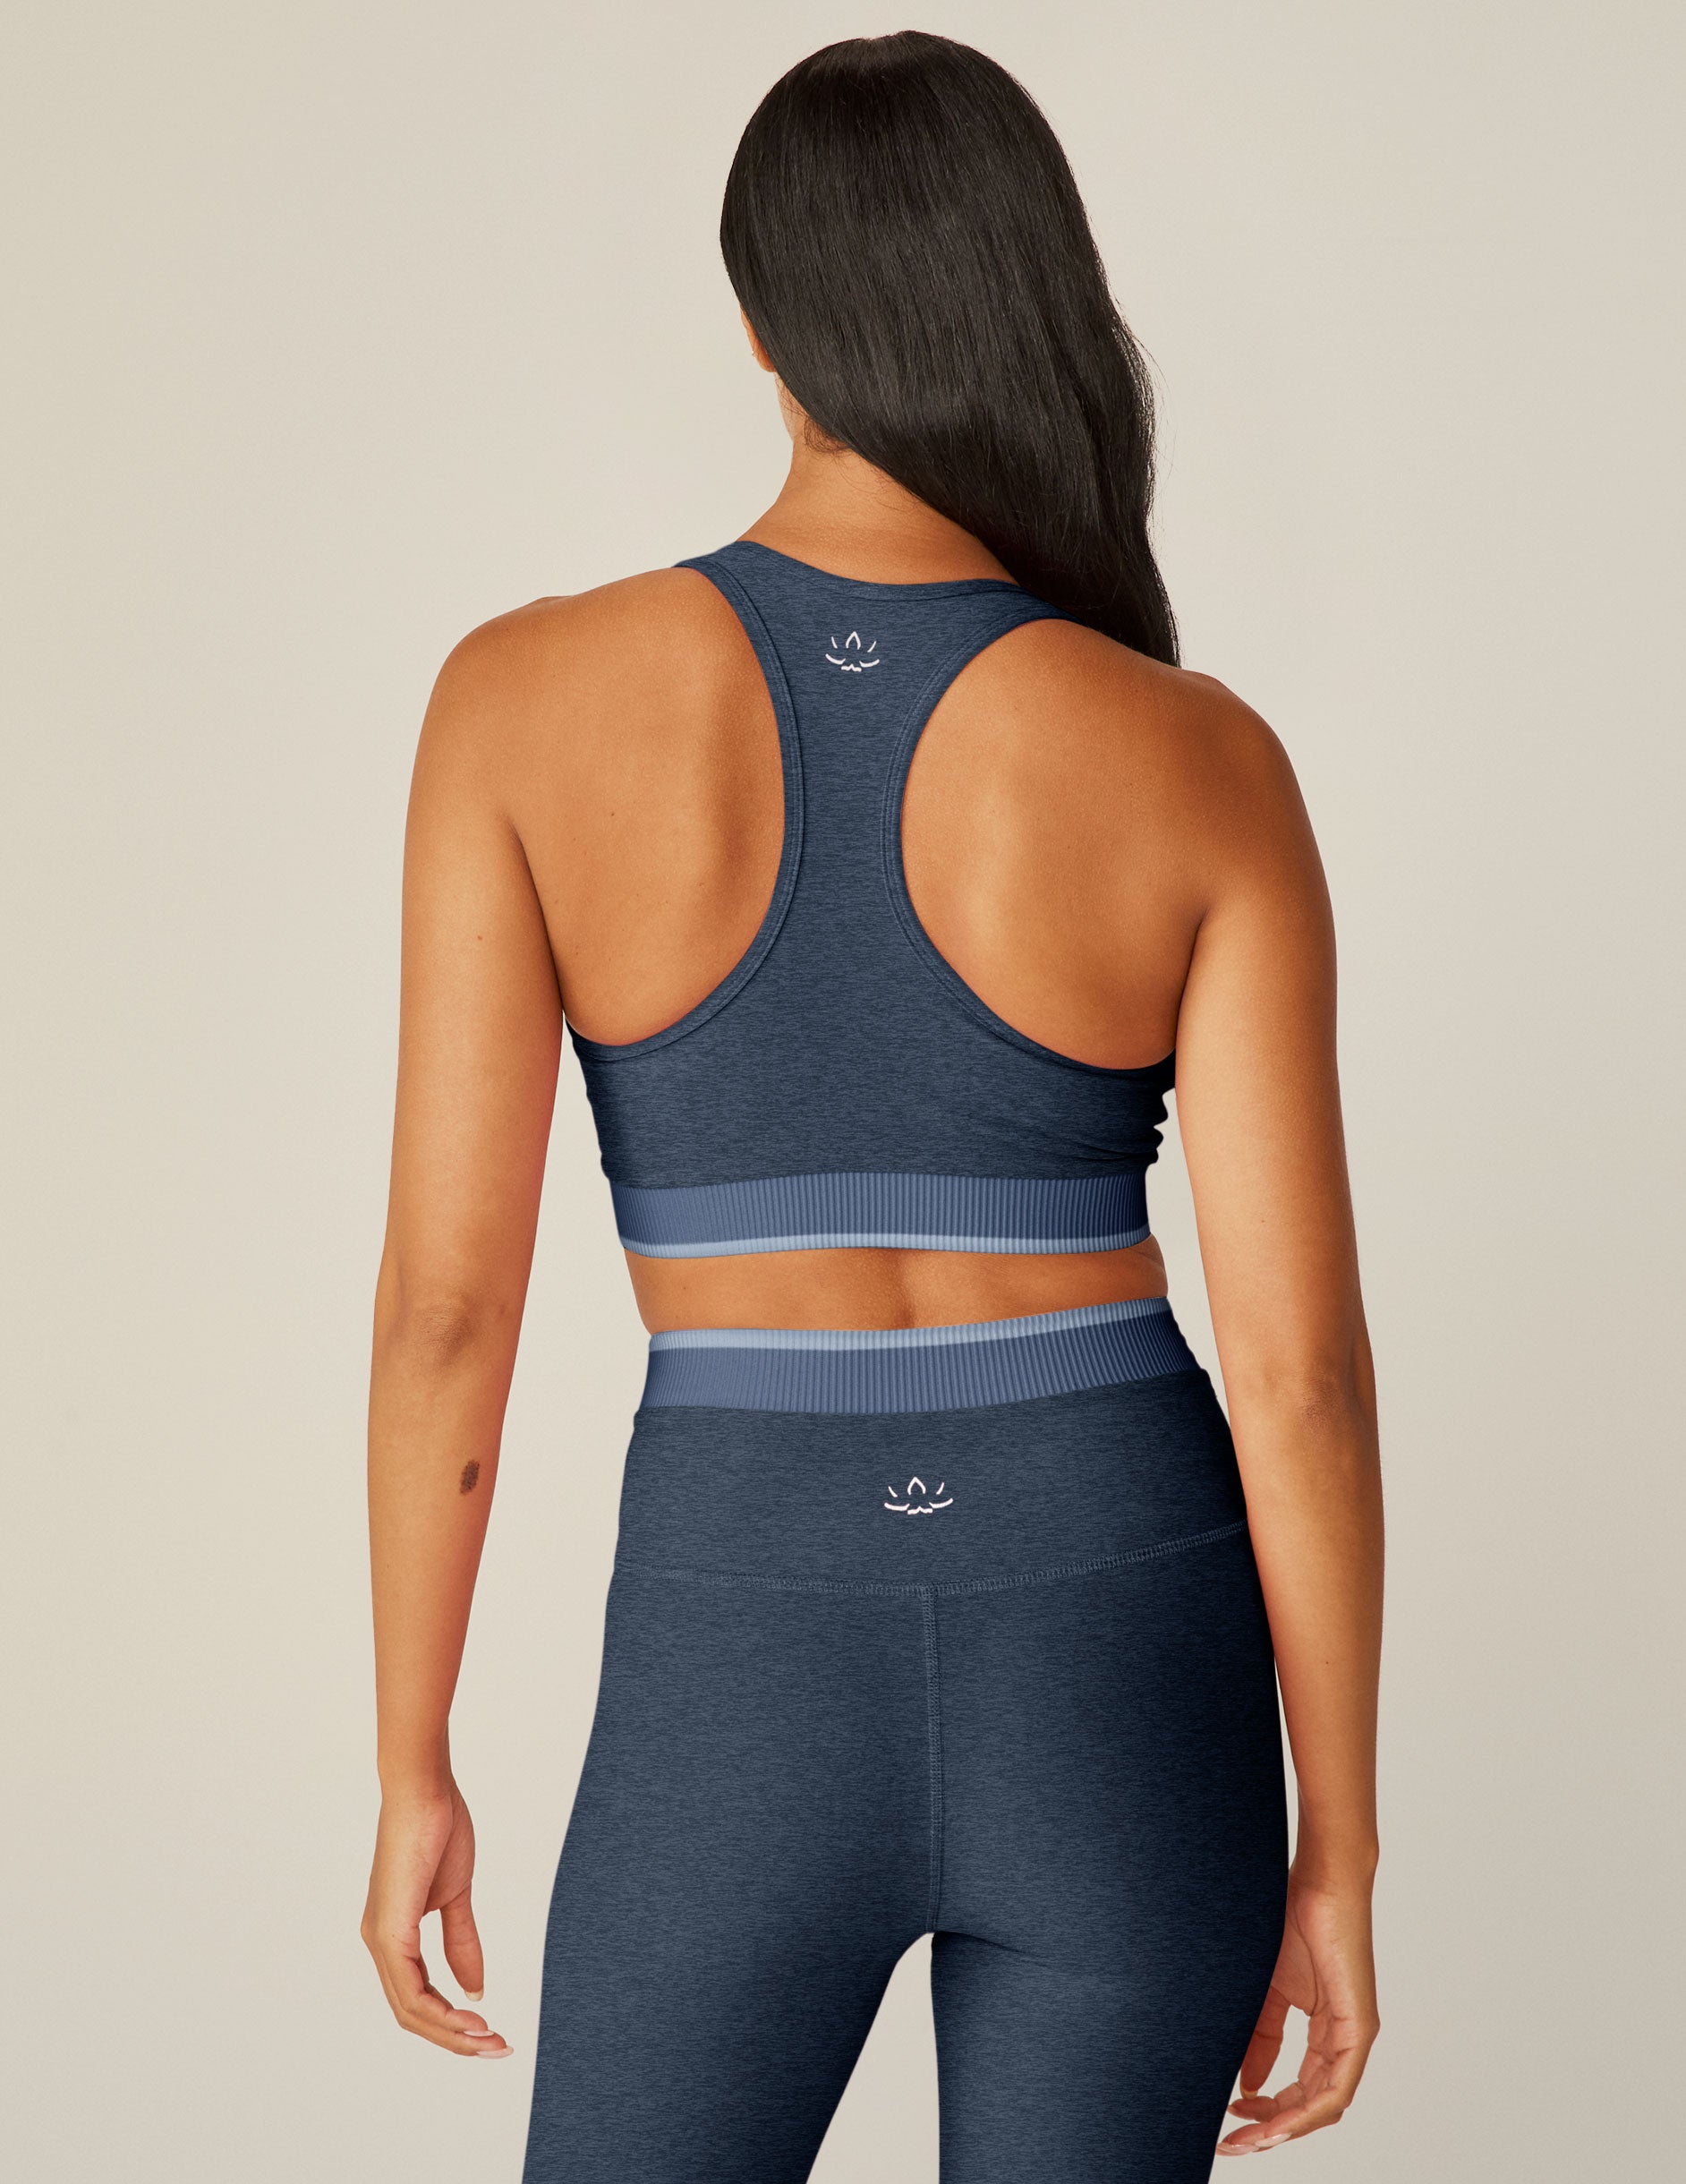 blue scooped neck racerback bra top with a front crossover and outlining detail.